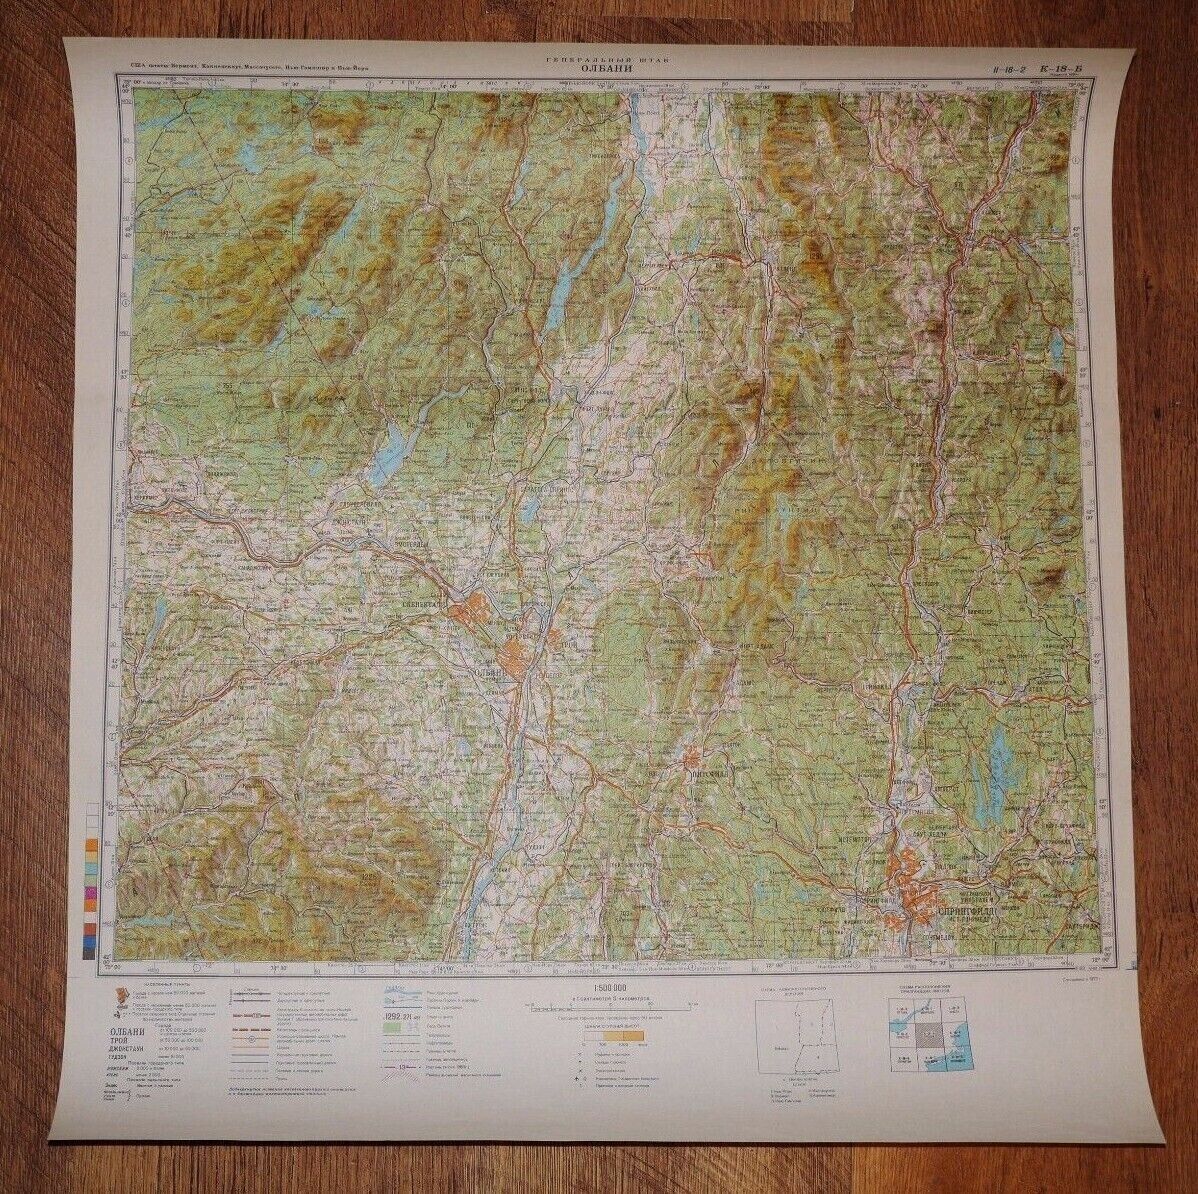 Authentic Soviet Army Military Topographic Map Albany, Springfield New York USA